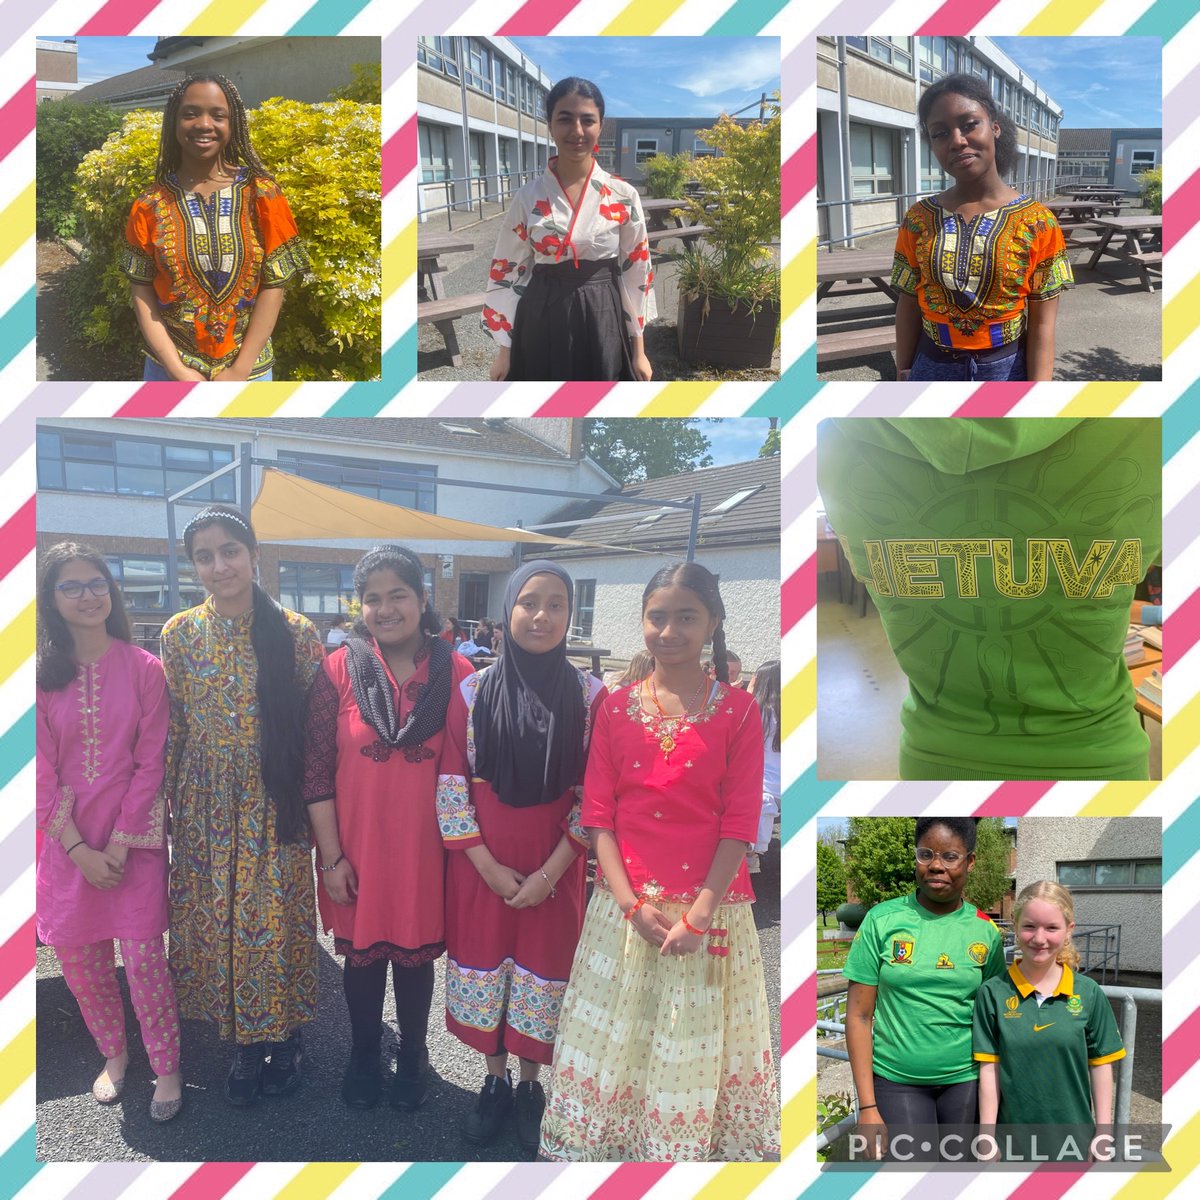 Wellbeing Week @StMarysCollege was awash with colour today as our school community cerebrated our cultural diversity through traditional dress and national or county jerseys @YFProgramme @SofSIreland @CeistTrust